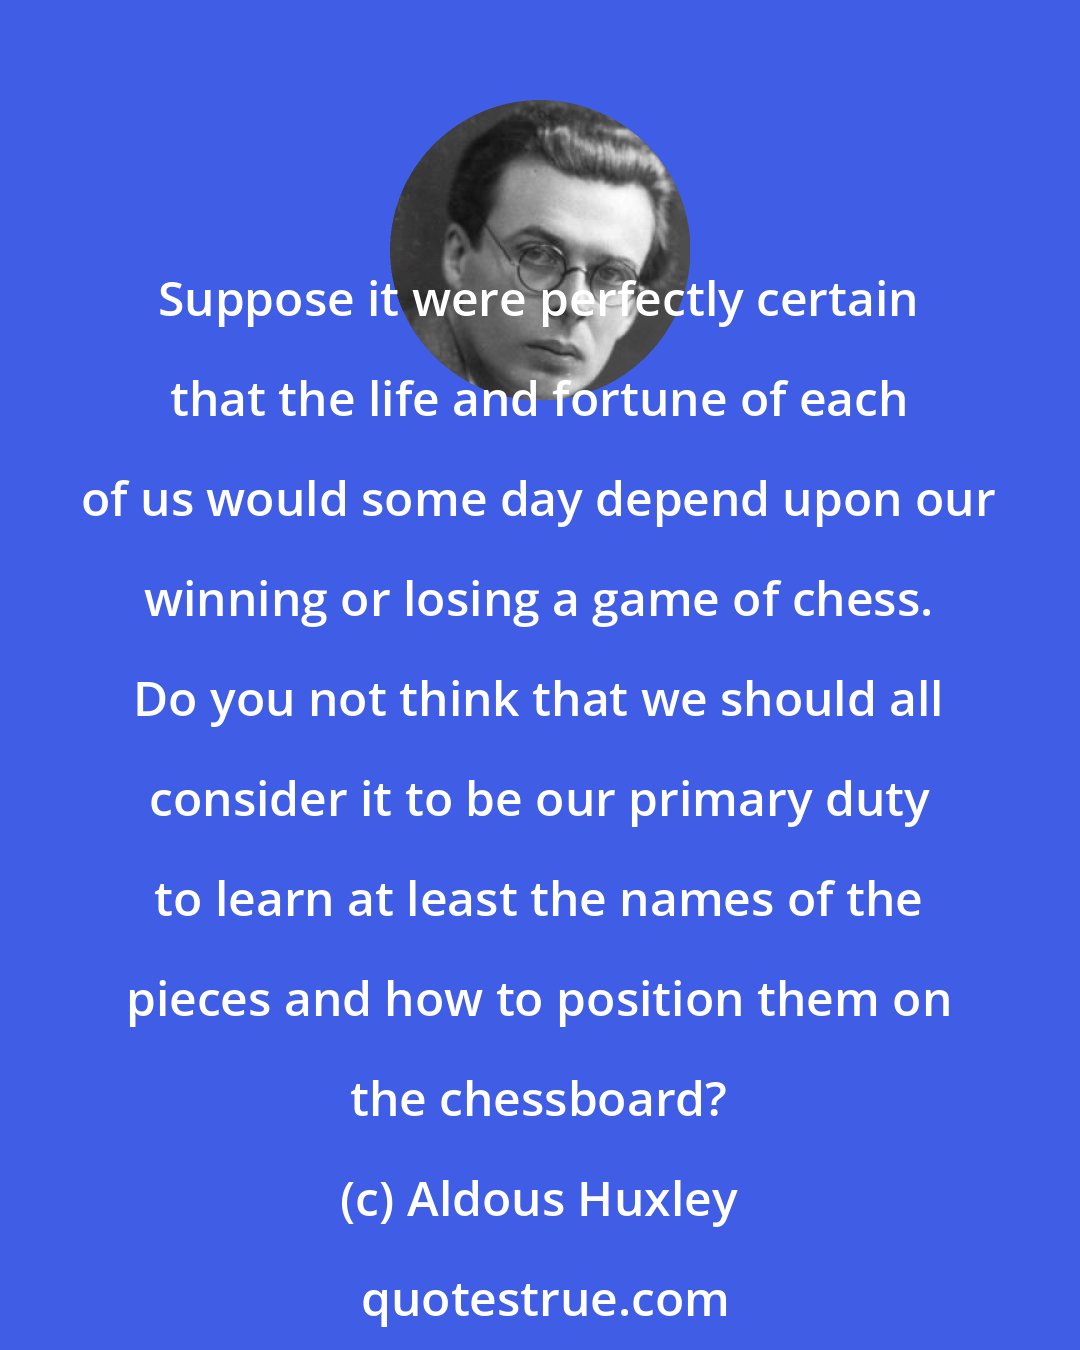 Aldous Huxley: Suppose it were perfectly certain that the life and fortune of each of us would some day depend upon our winning or losing a game of chess. Do you not think that we should all consider it to be our primary duty to learn at least the names of the pieces and how to position them on the chessboard?